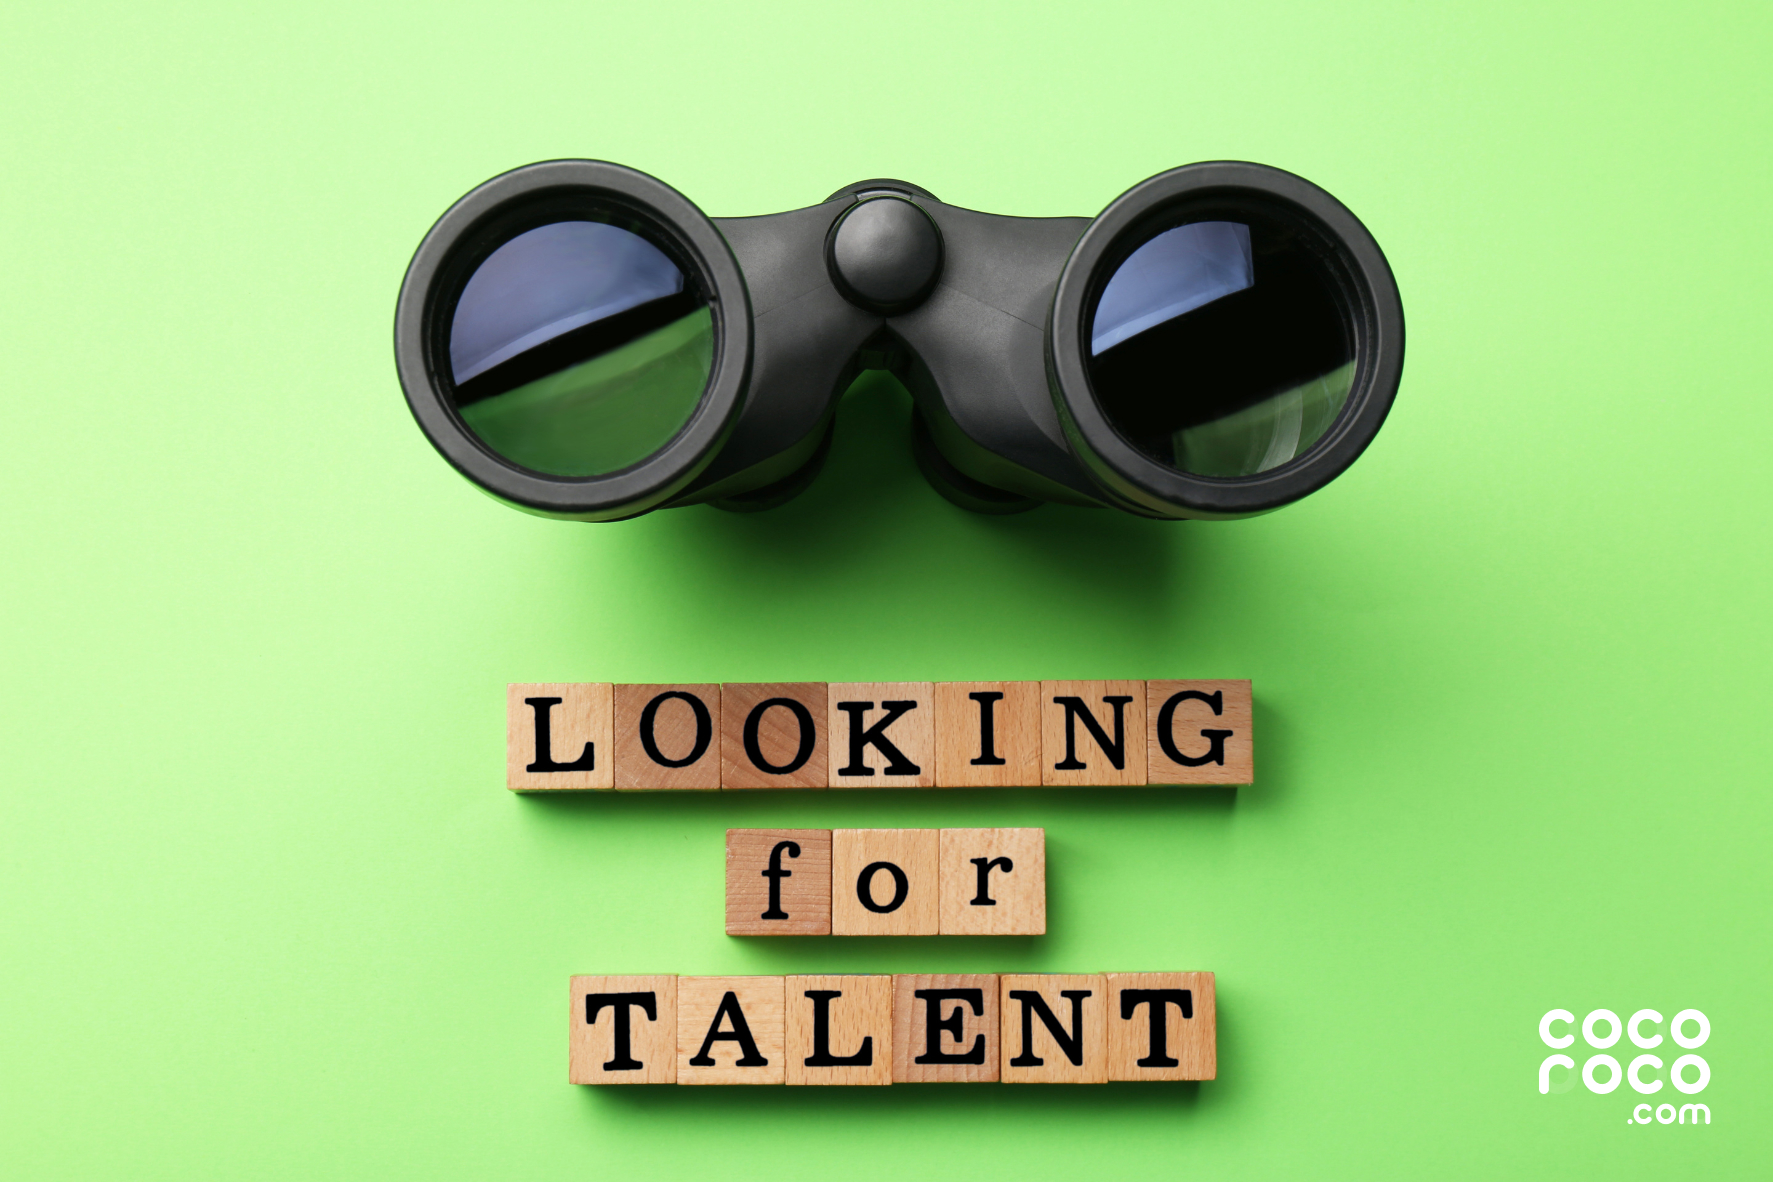 Looking for talent